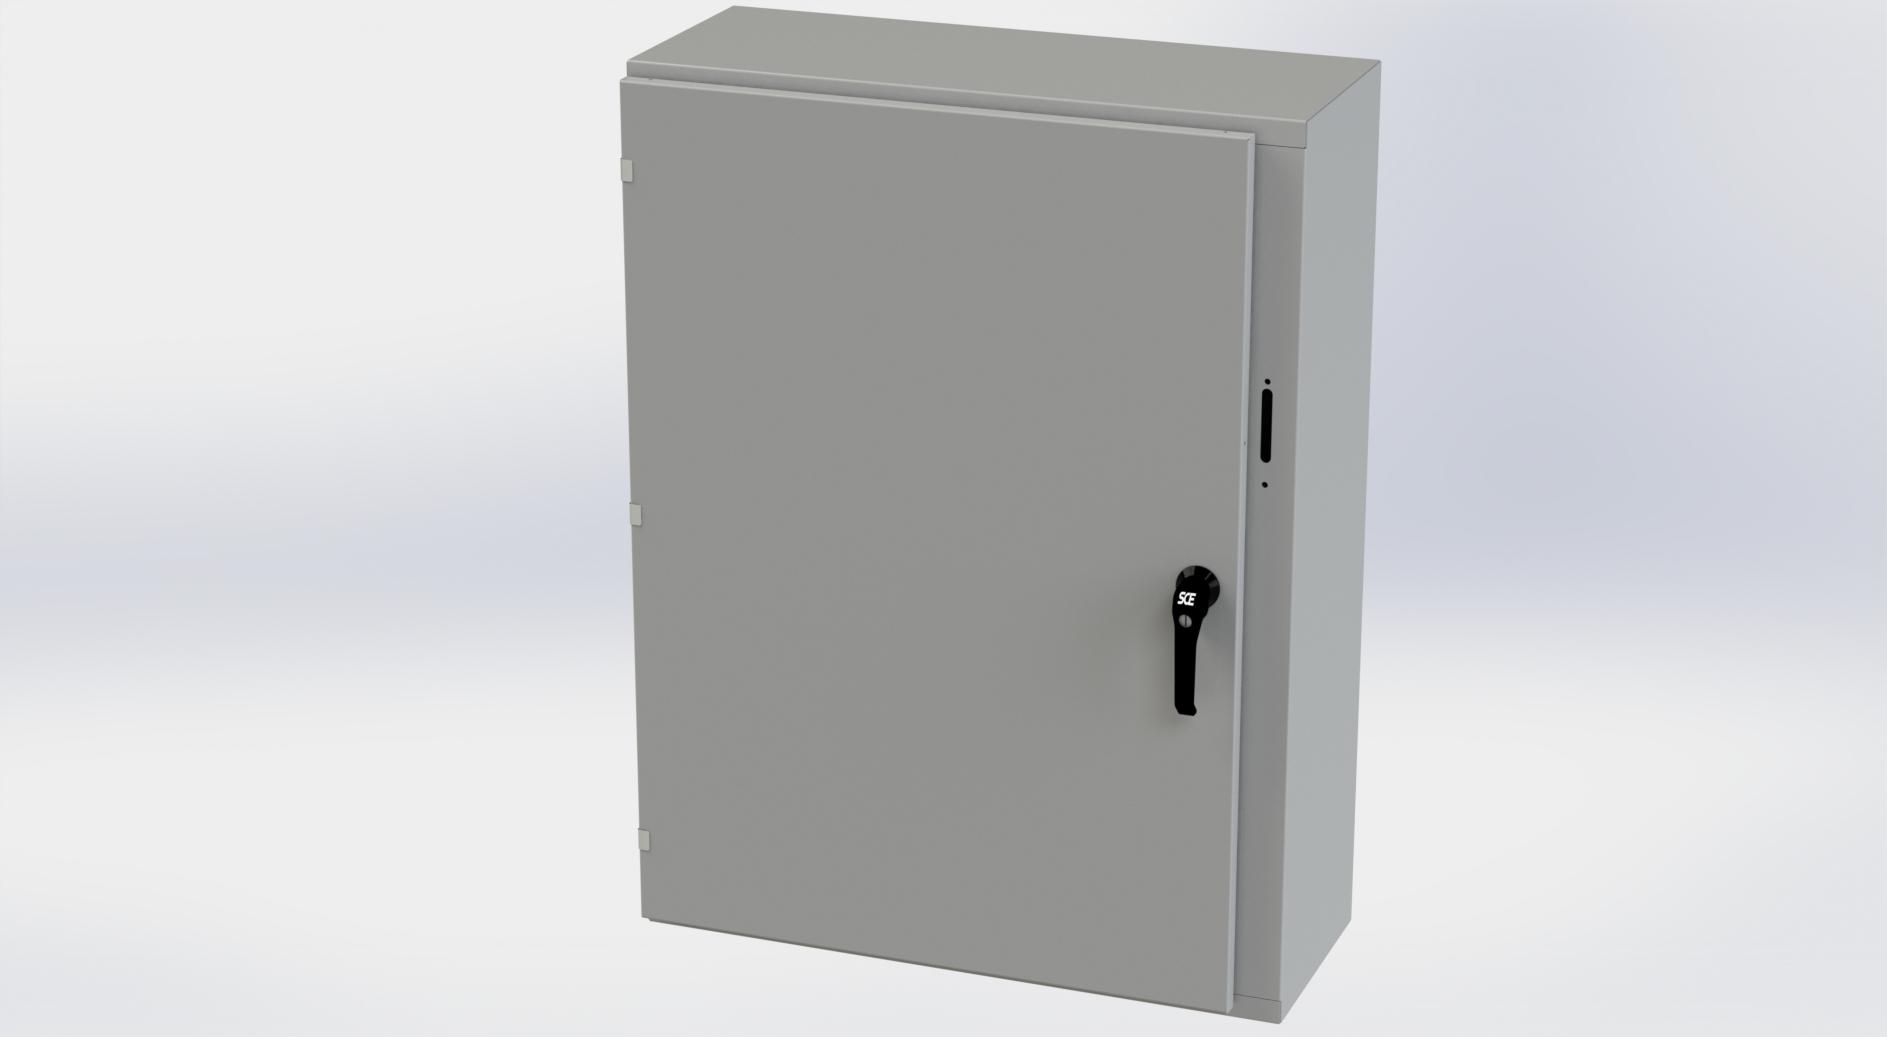 Saginaw Control SCE-42XEL3112LP XEL LP Enclosure, Height:42.00", Width:31.38", Depth:12.00", ANSI-61 gray powder coating inside and out. Optional sub-panels are powder coated white.